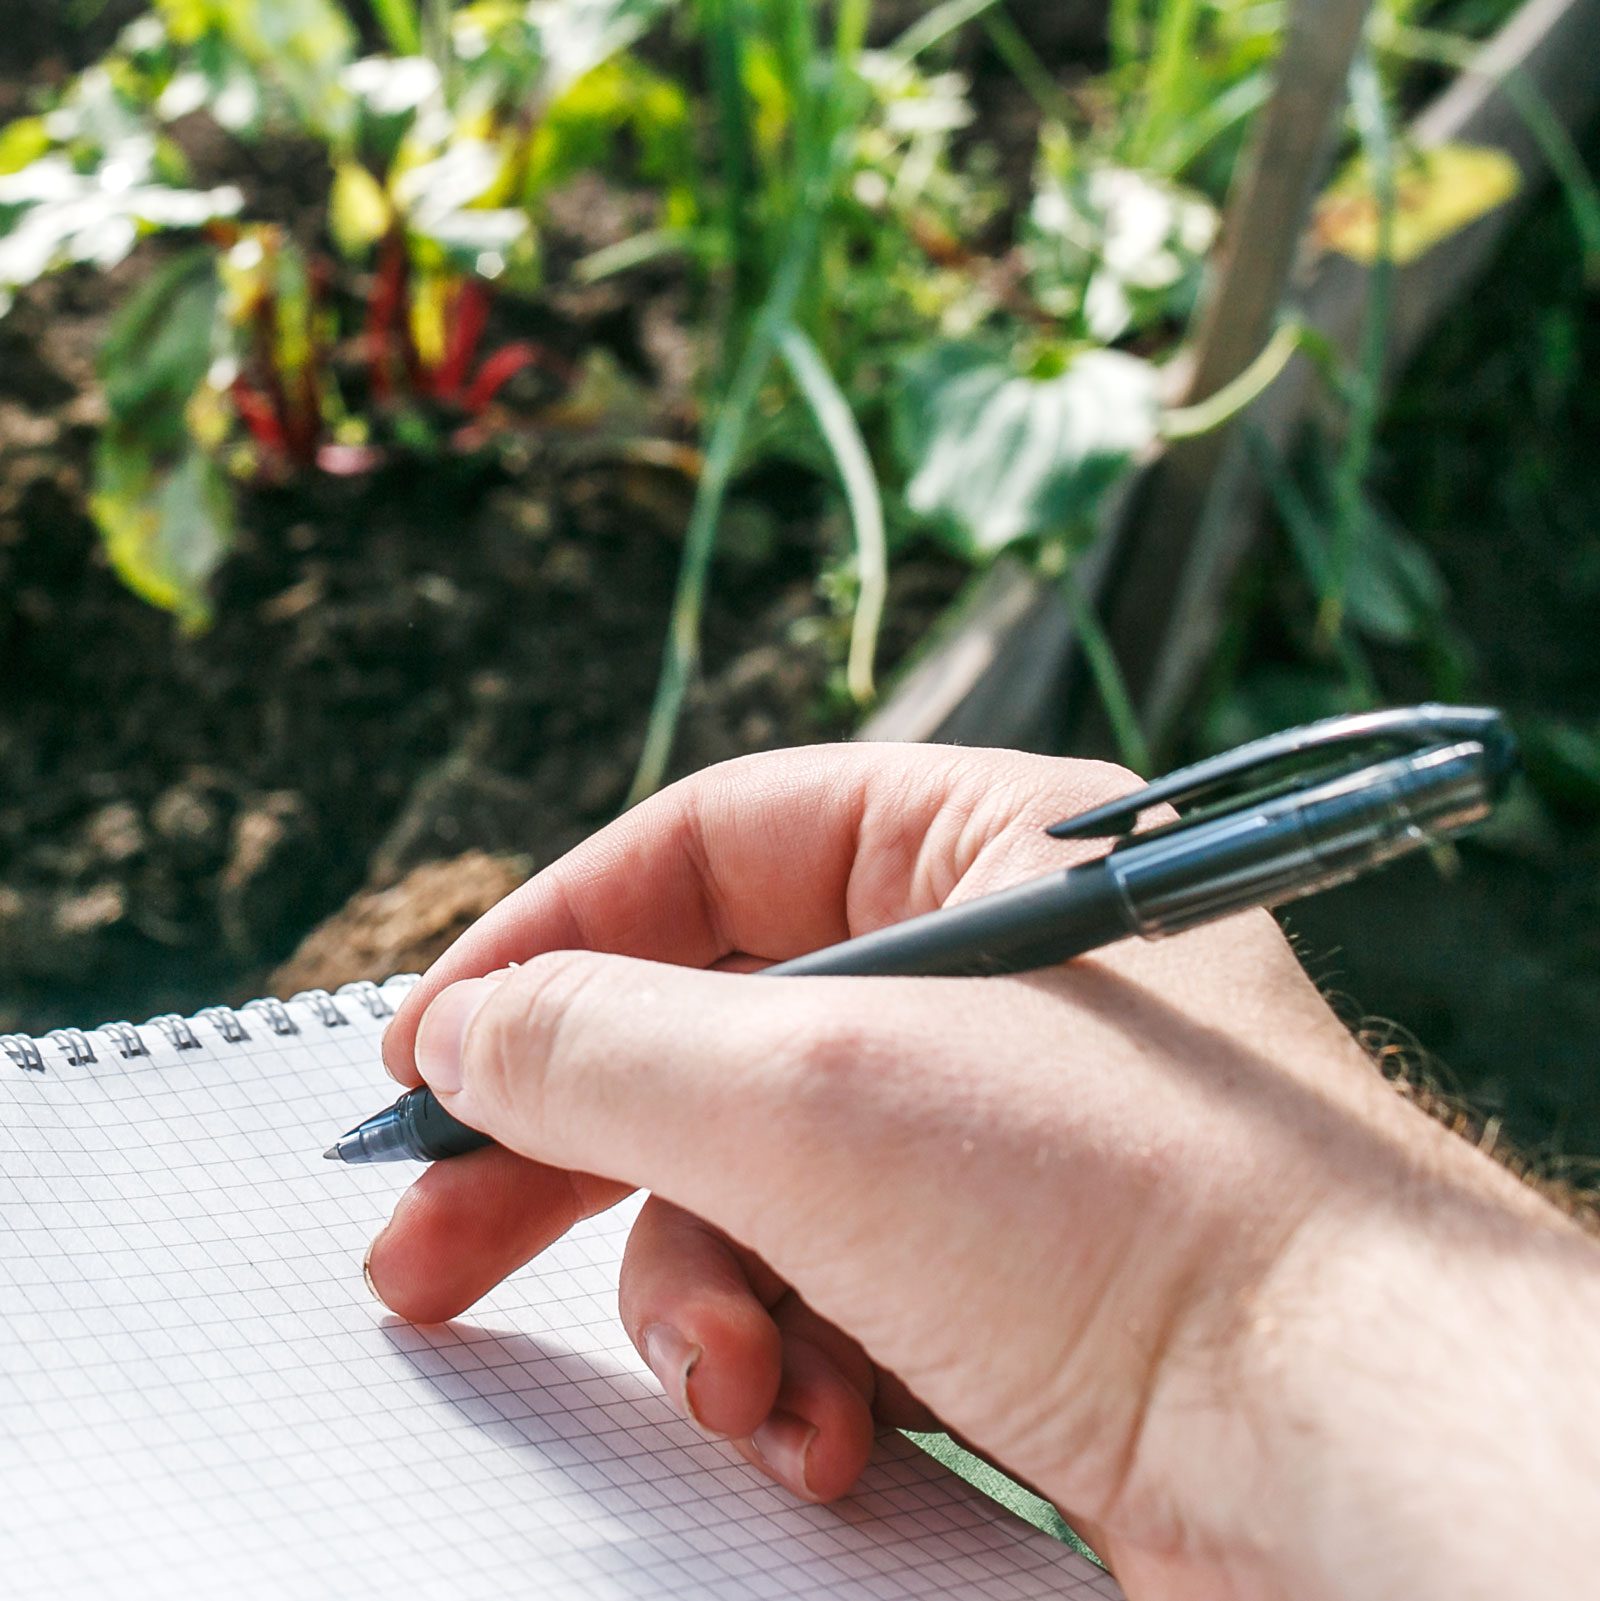 Closeup hands of greenhouse worker taking notes in seedlings in notebook. Tomatoes seedling